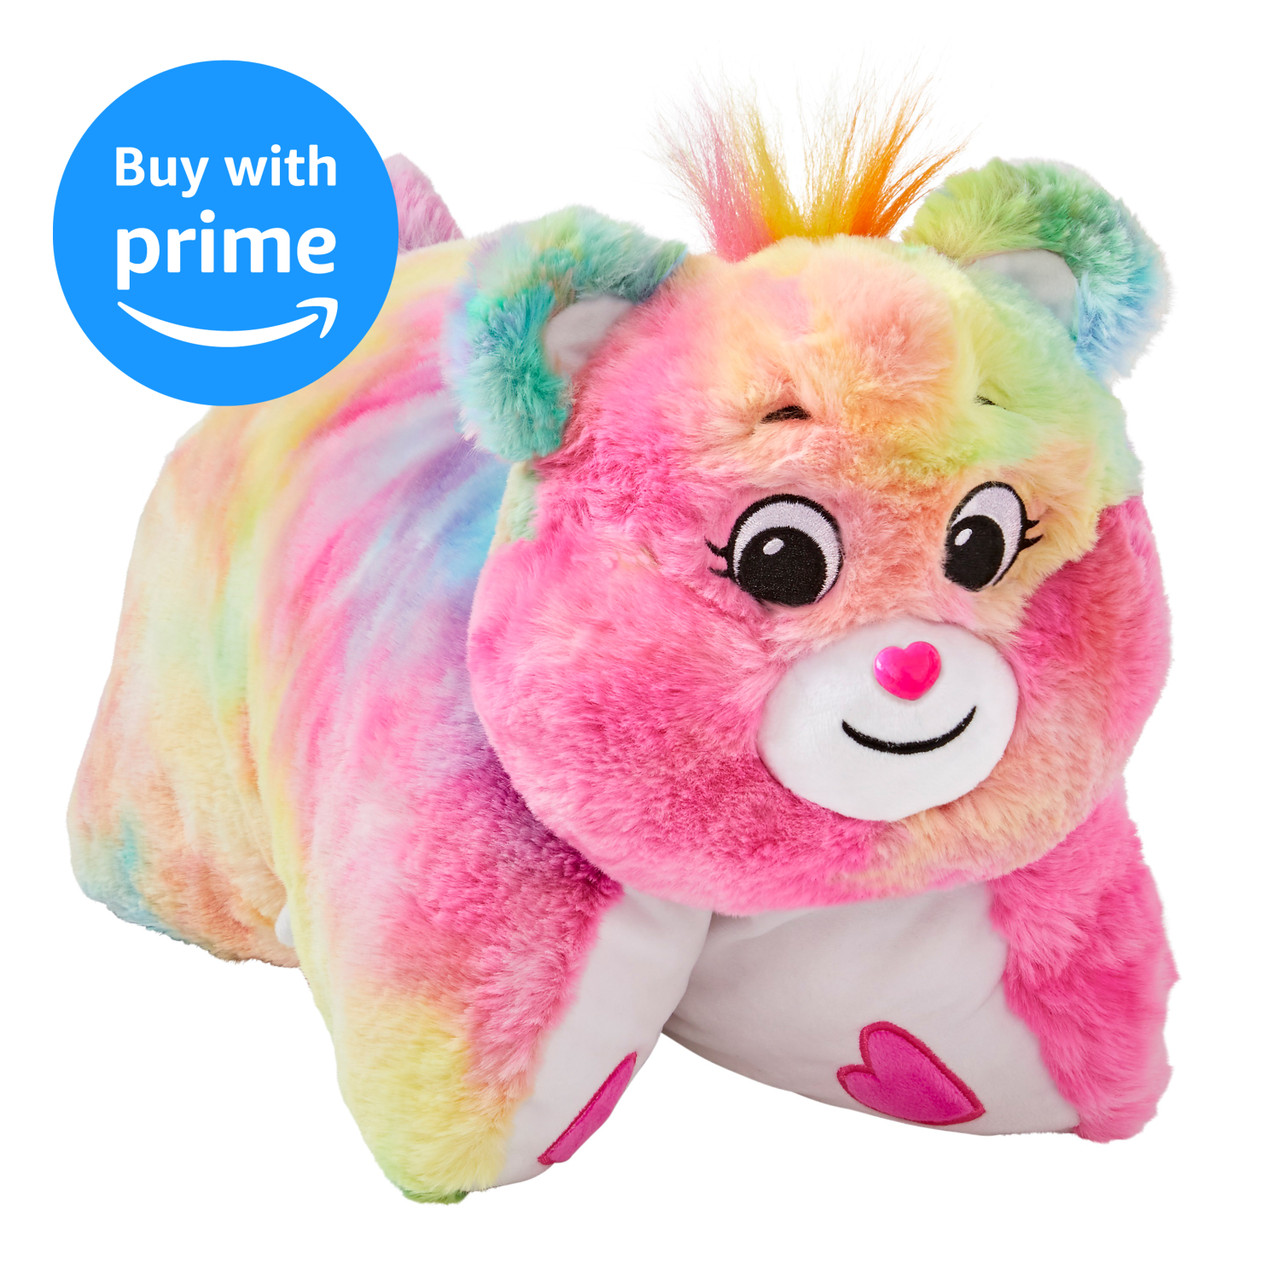 Pillow Pets Care Bear Togetherness Bear, 16 inch Stuffed Animal Plush Toy